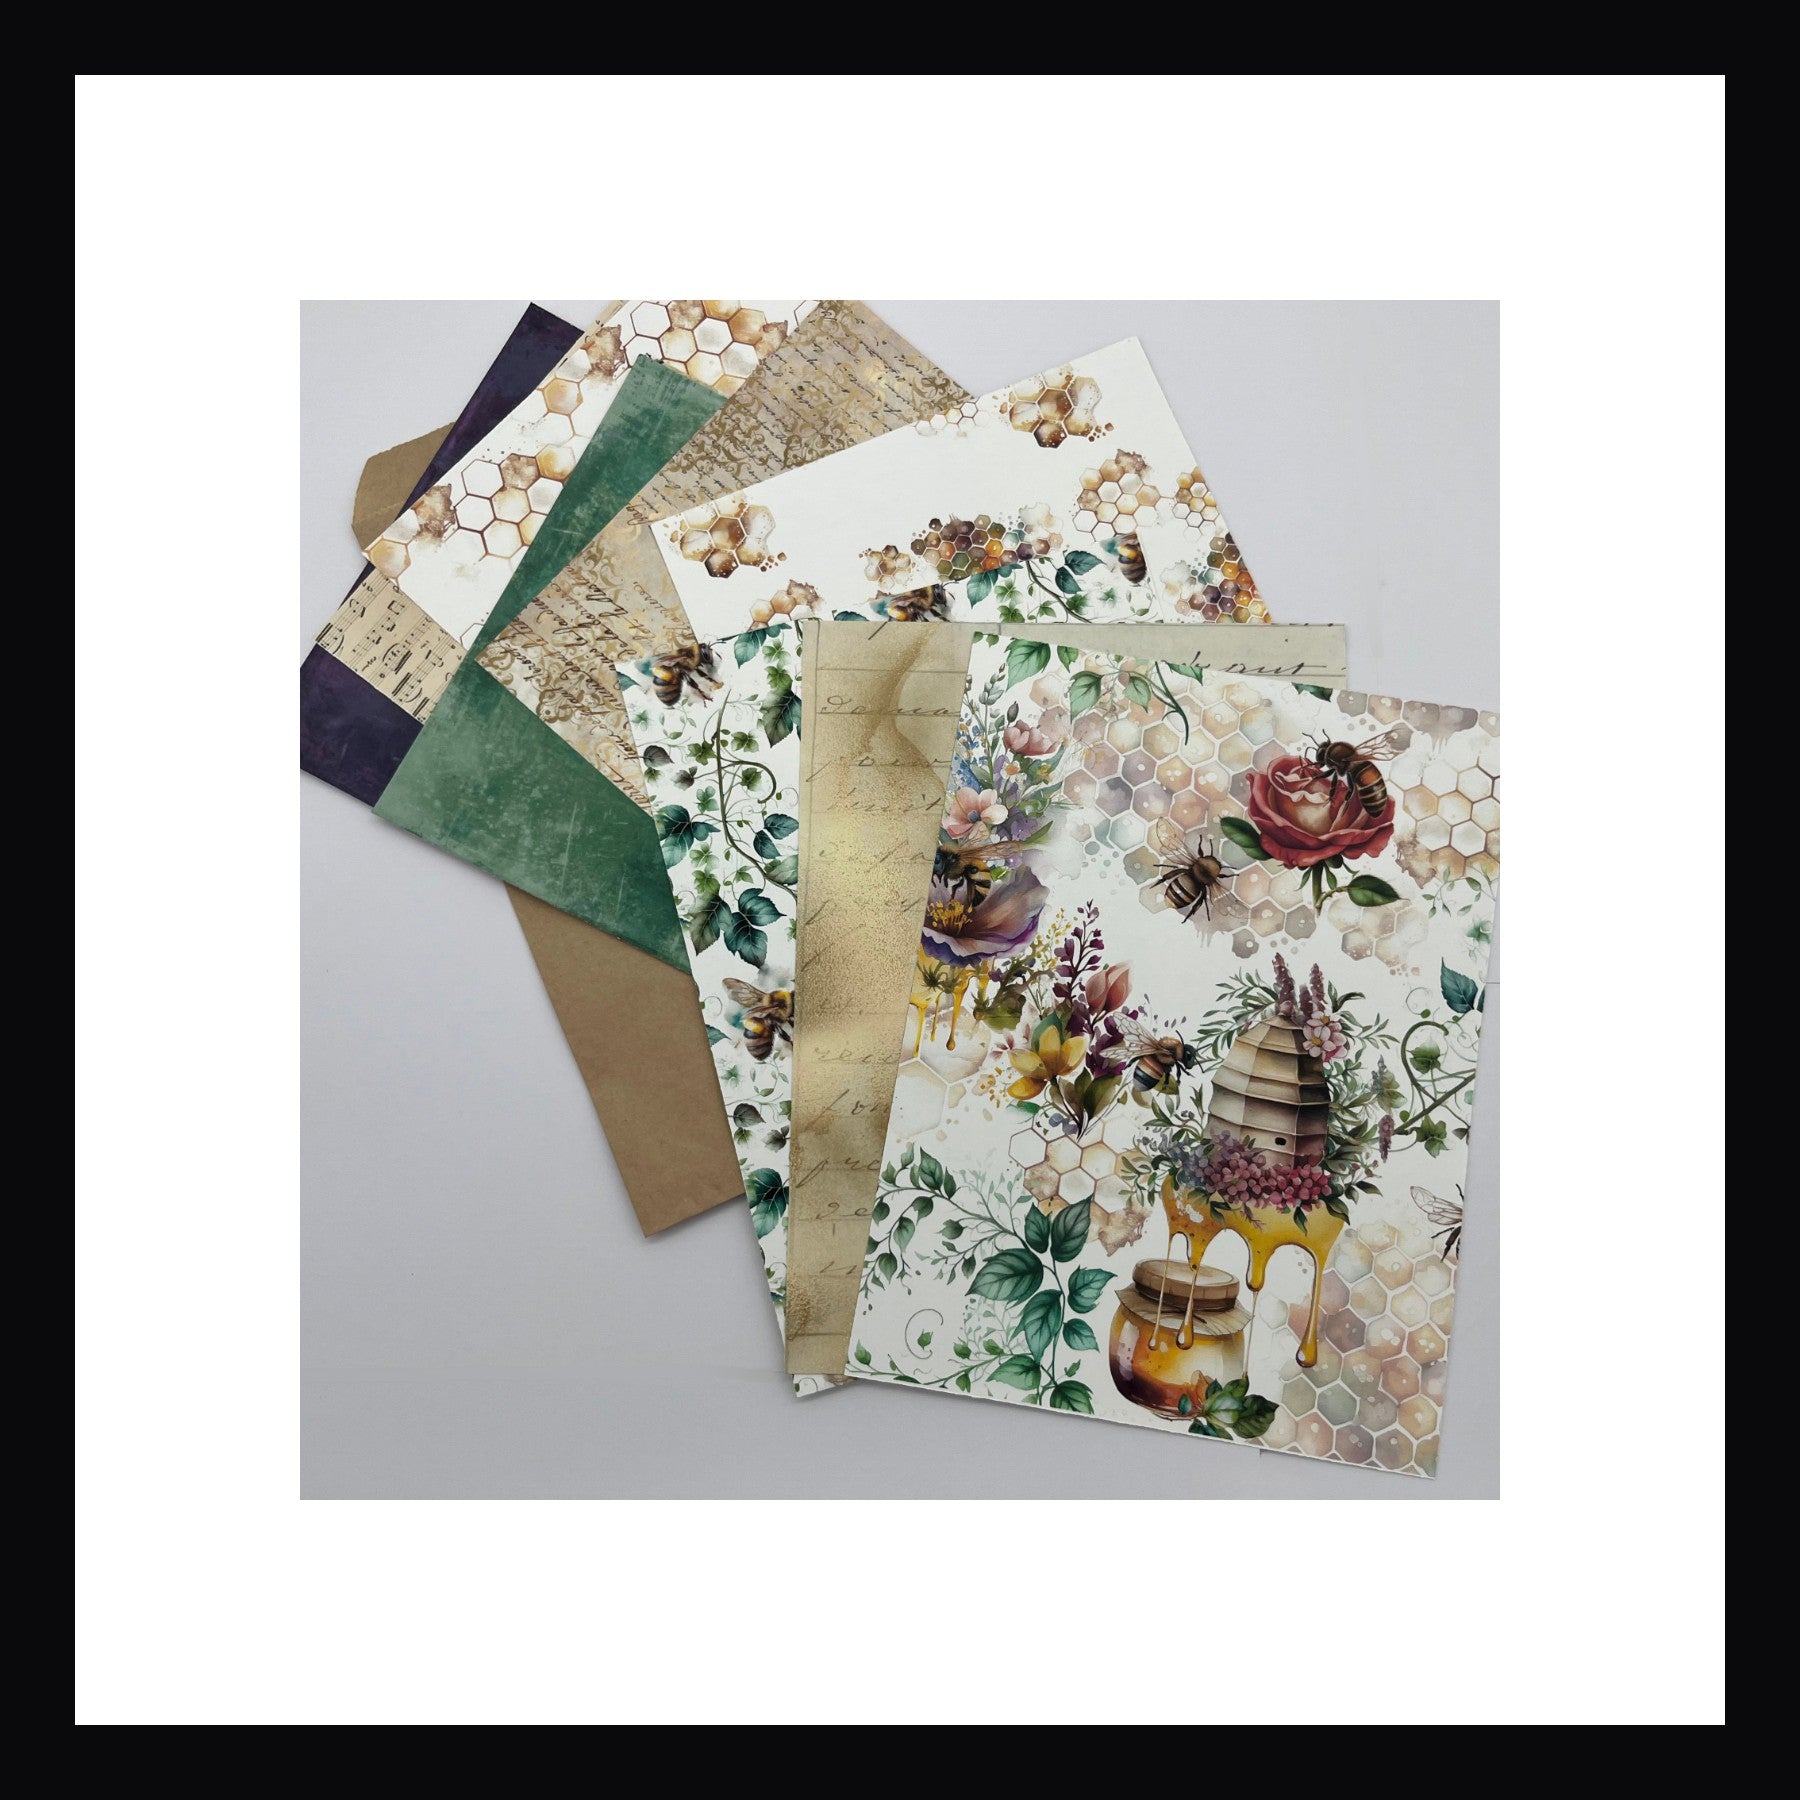 Bees & Honey Junk Journaling Kit papers. Kit includes 12 double sided papers all measuring 6"x8".  Papers include watercolor floral patterns, aged music, antique writings and honeycomb patterns.